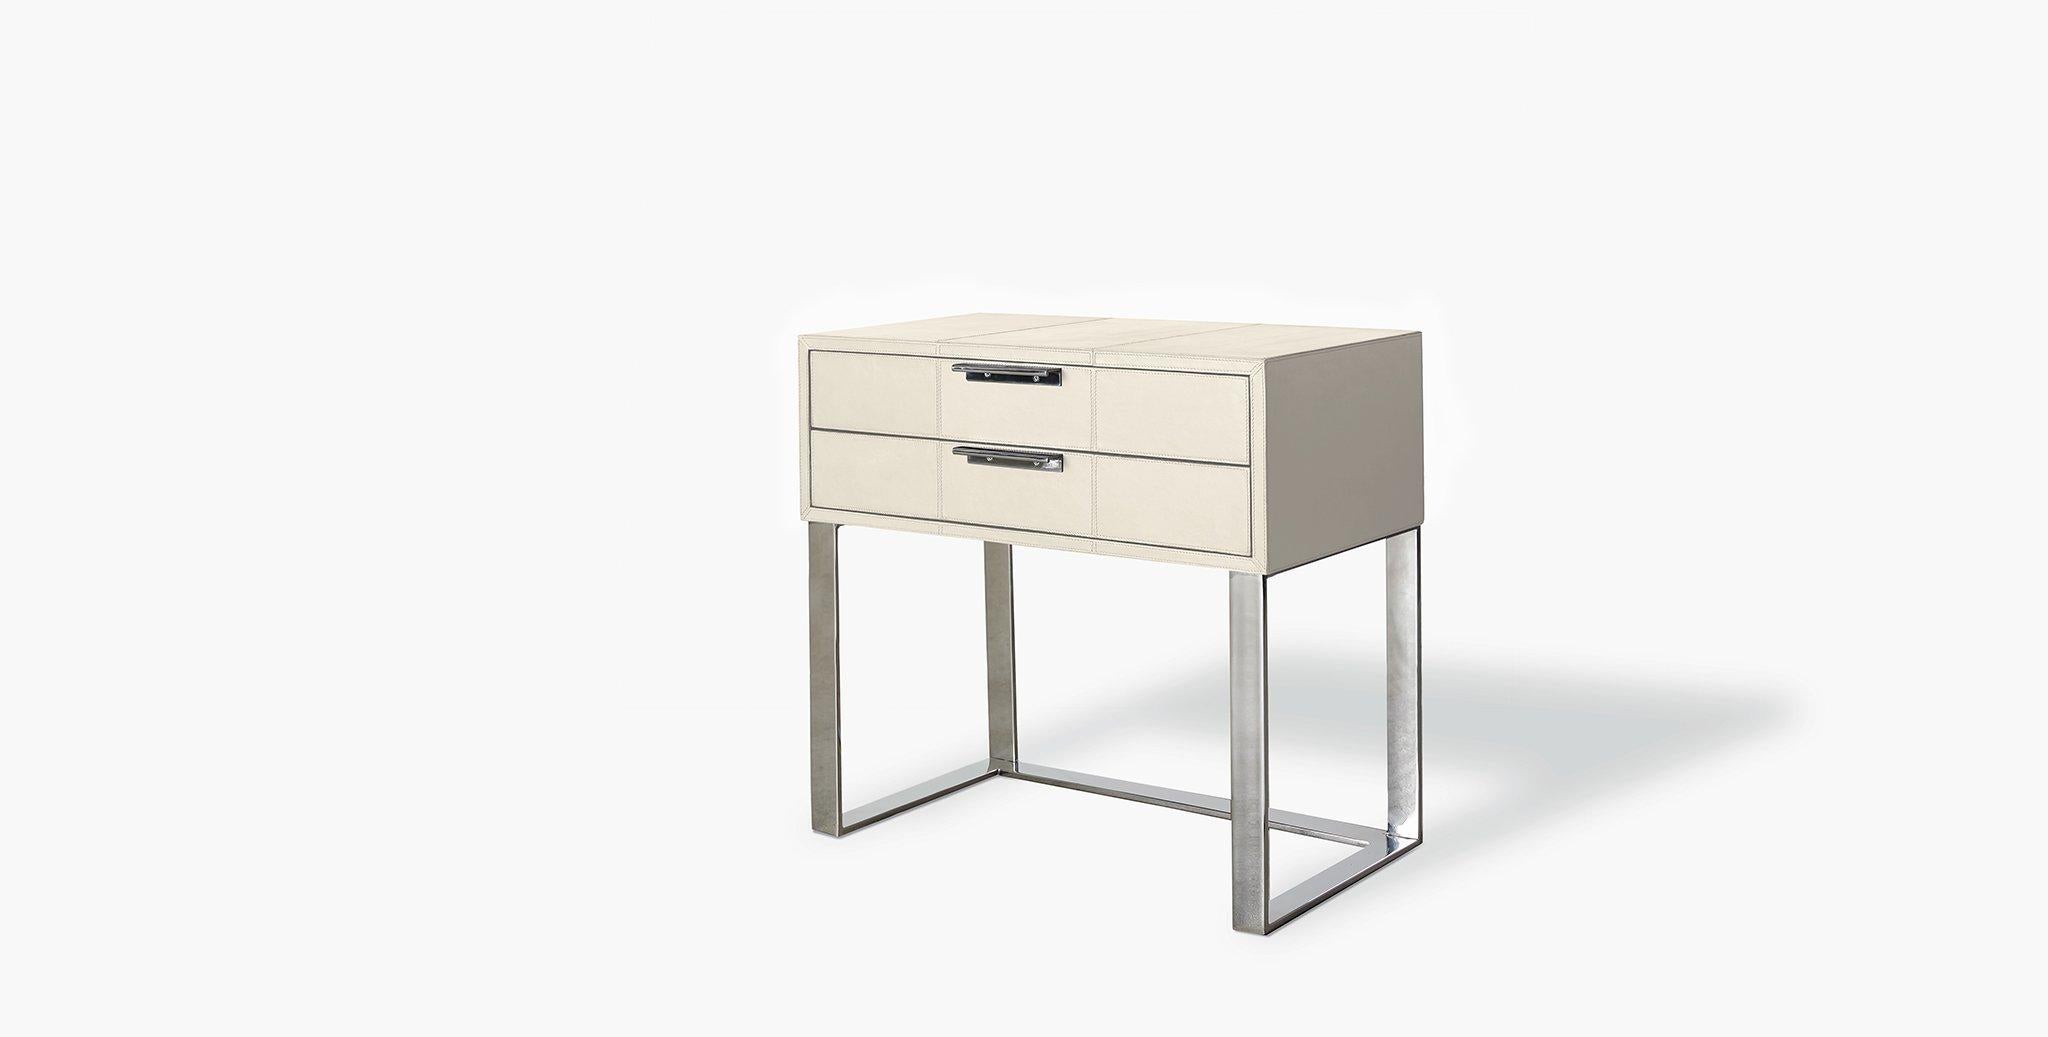 Our Holbrook Nightstand features two slender drawers accented with slim horizontal metal pulls and an open metal base for a clean and modern look. Our handcrafted leathers and finishes are inspired by the natural variations within fibers, textures,